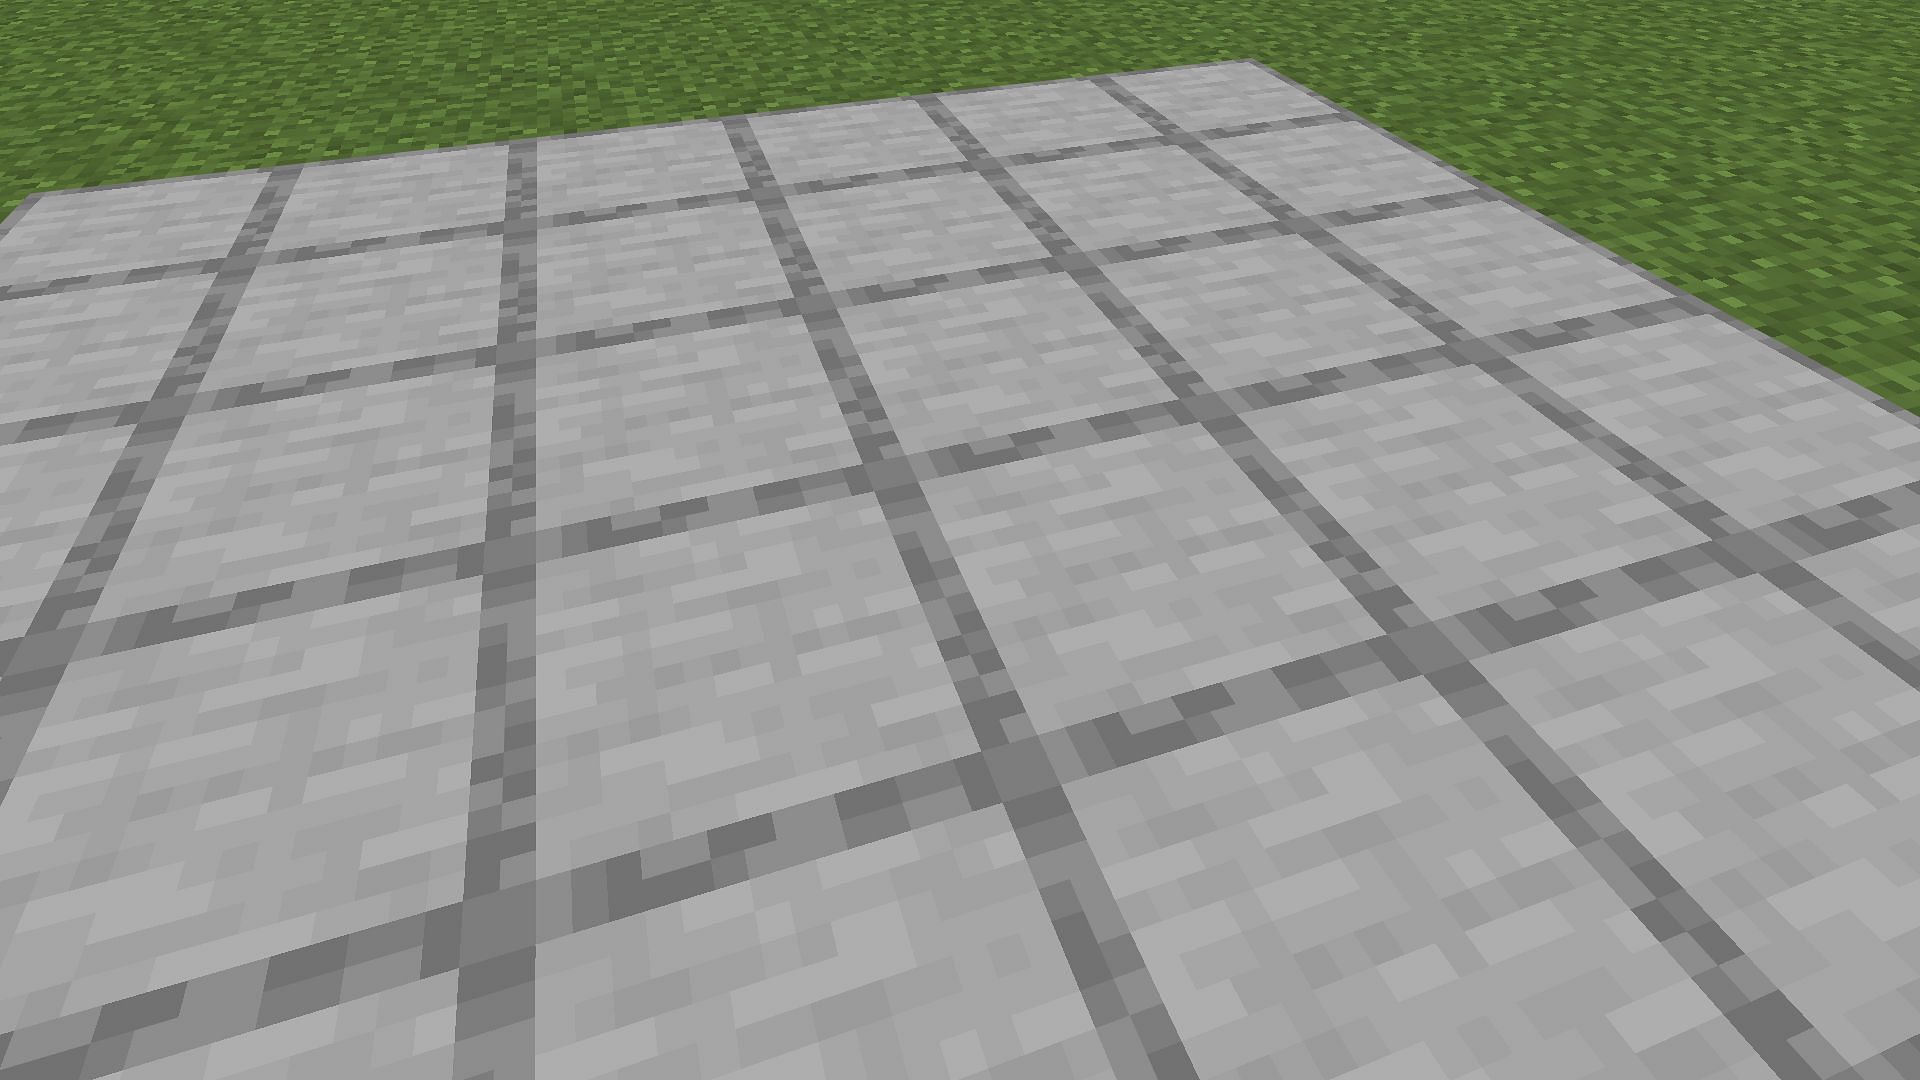 Smooth stone looks like tiles when placed on the floor (Image via Mojang)